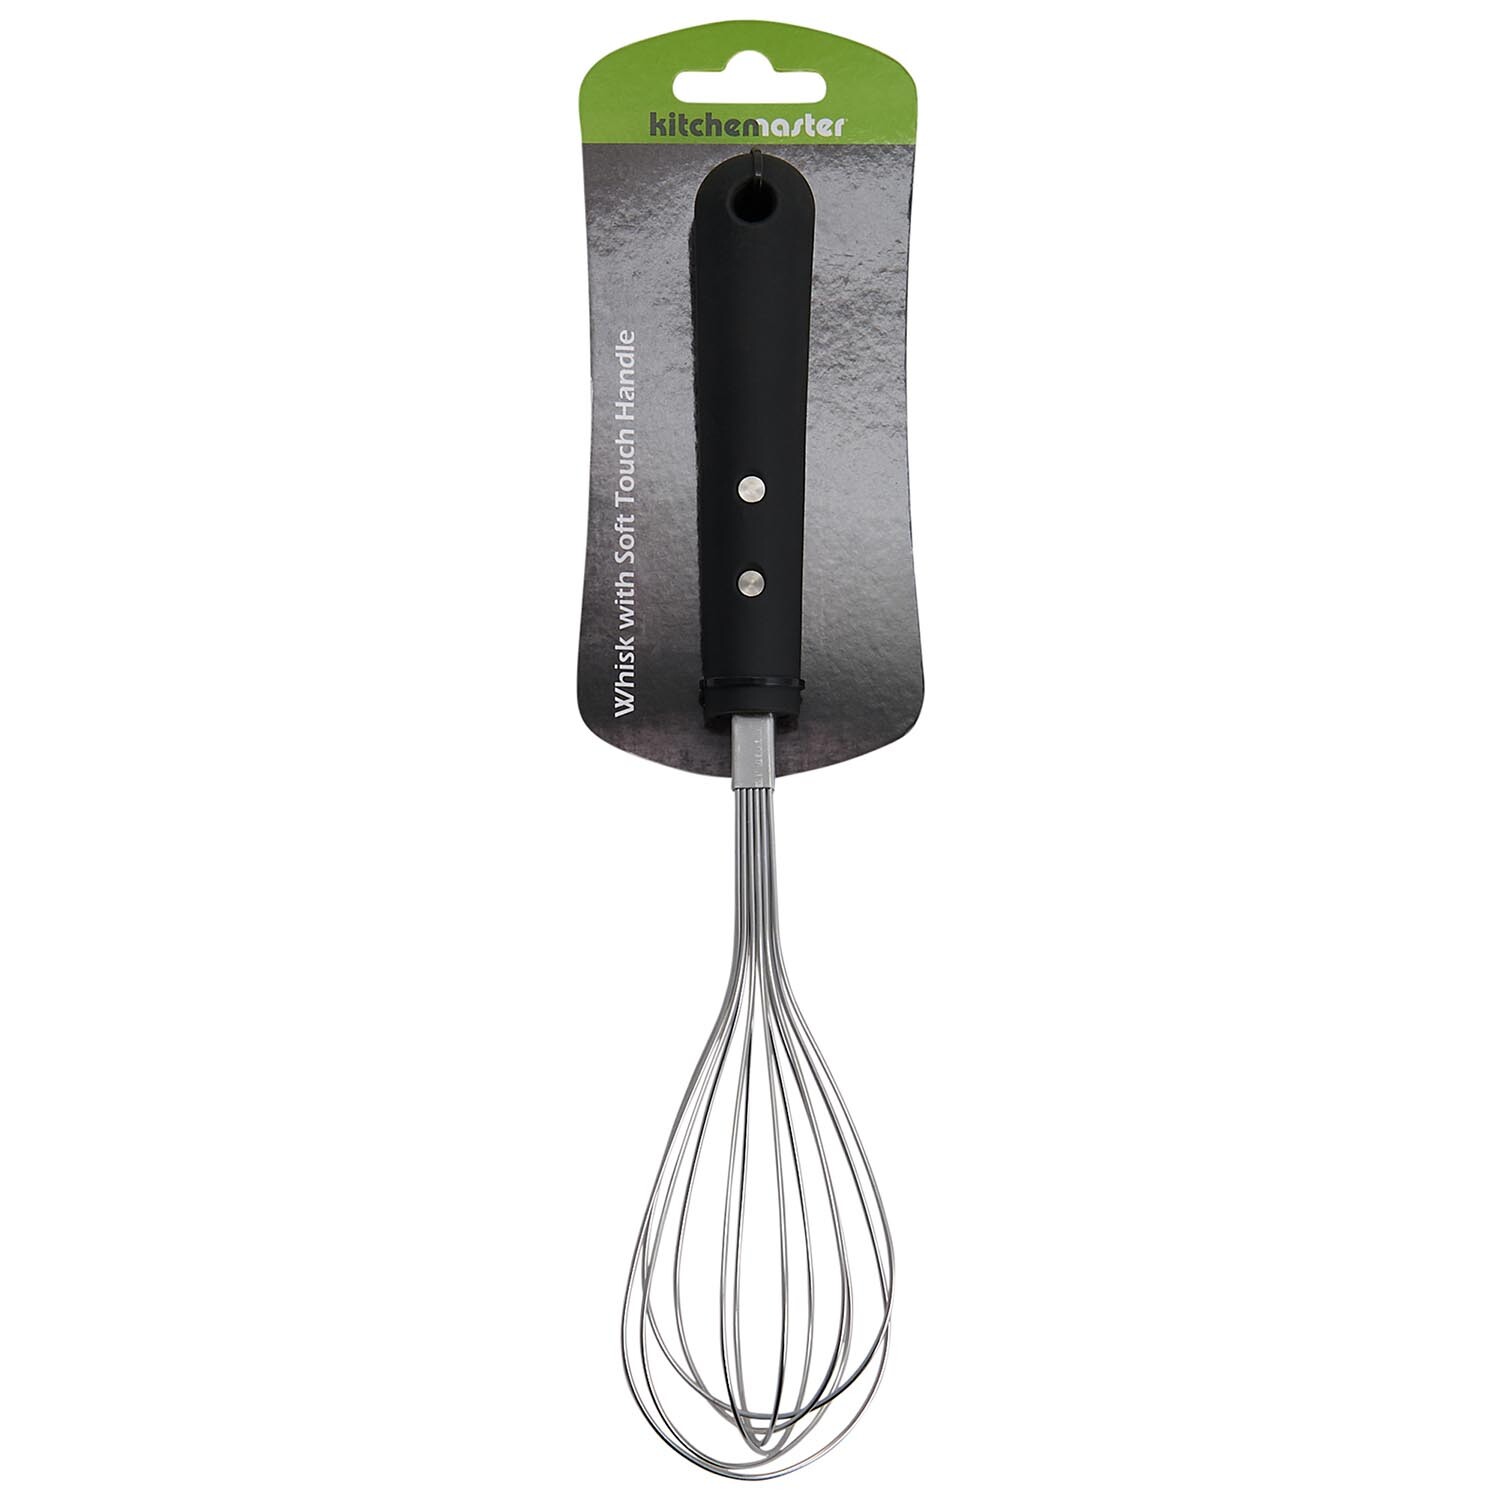 Kitchenmaster Whisk with Soft Touch Handle - Black Image 1